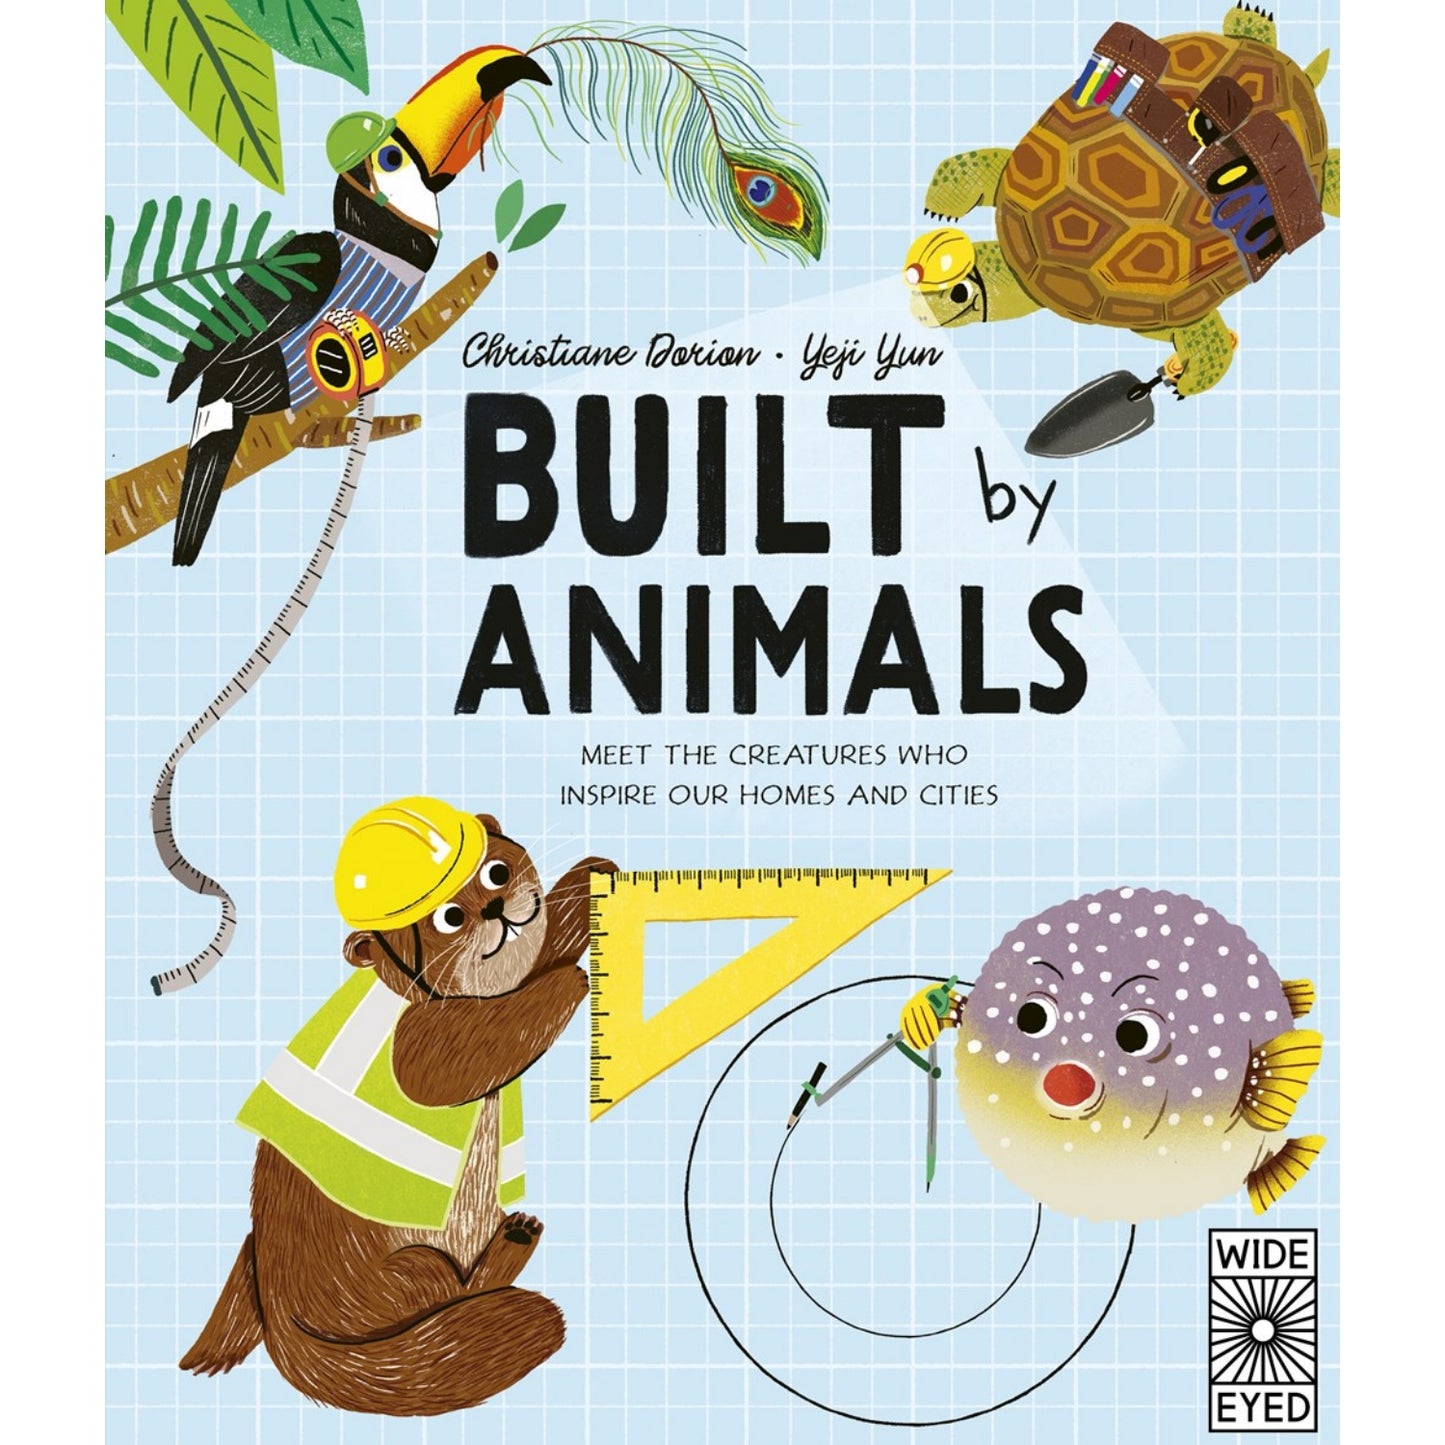 Built by Animals: Meet The Creatures Who Inspire Our Homes And Cities | Hardcover | Children's Book on Nature